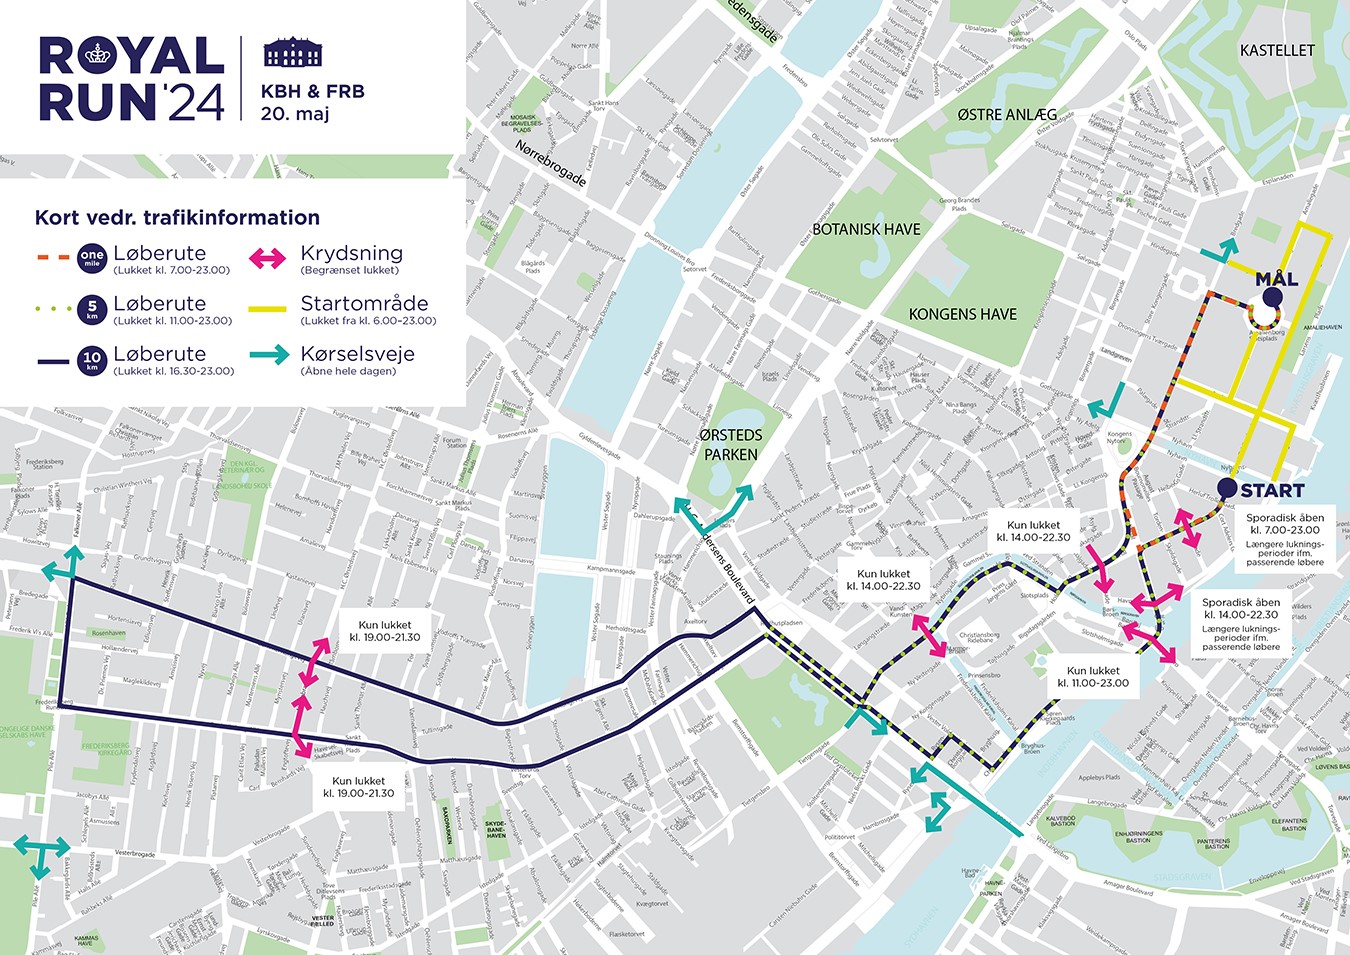 Royal Run will disrupt Copenhagen traffic and pedestrians on holiday Sunday and Monday